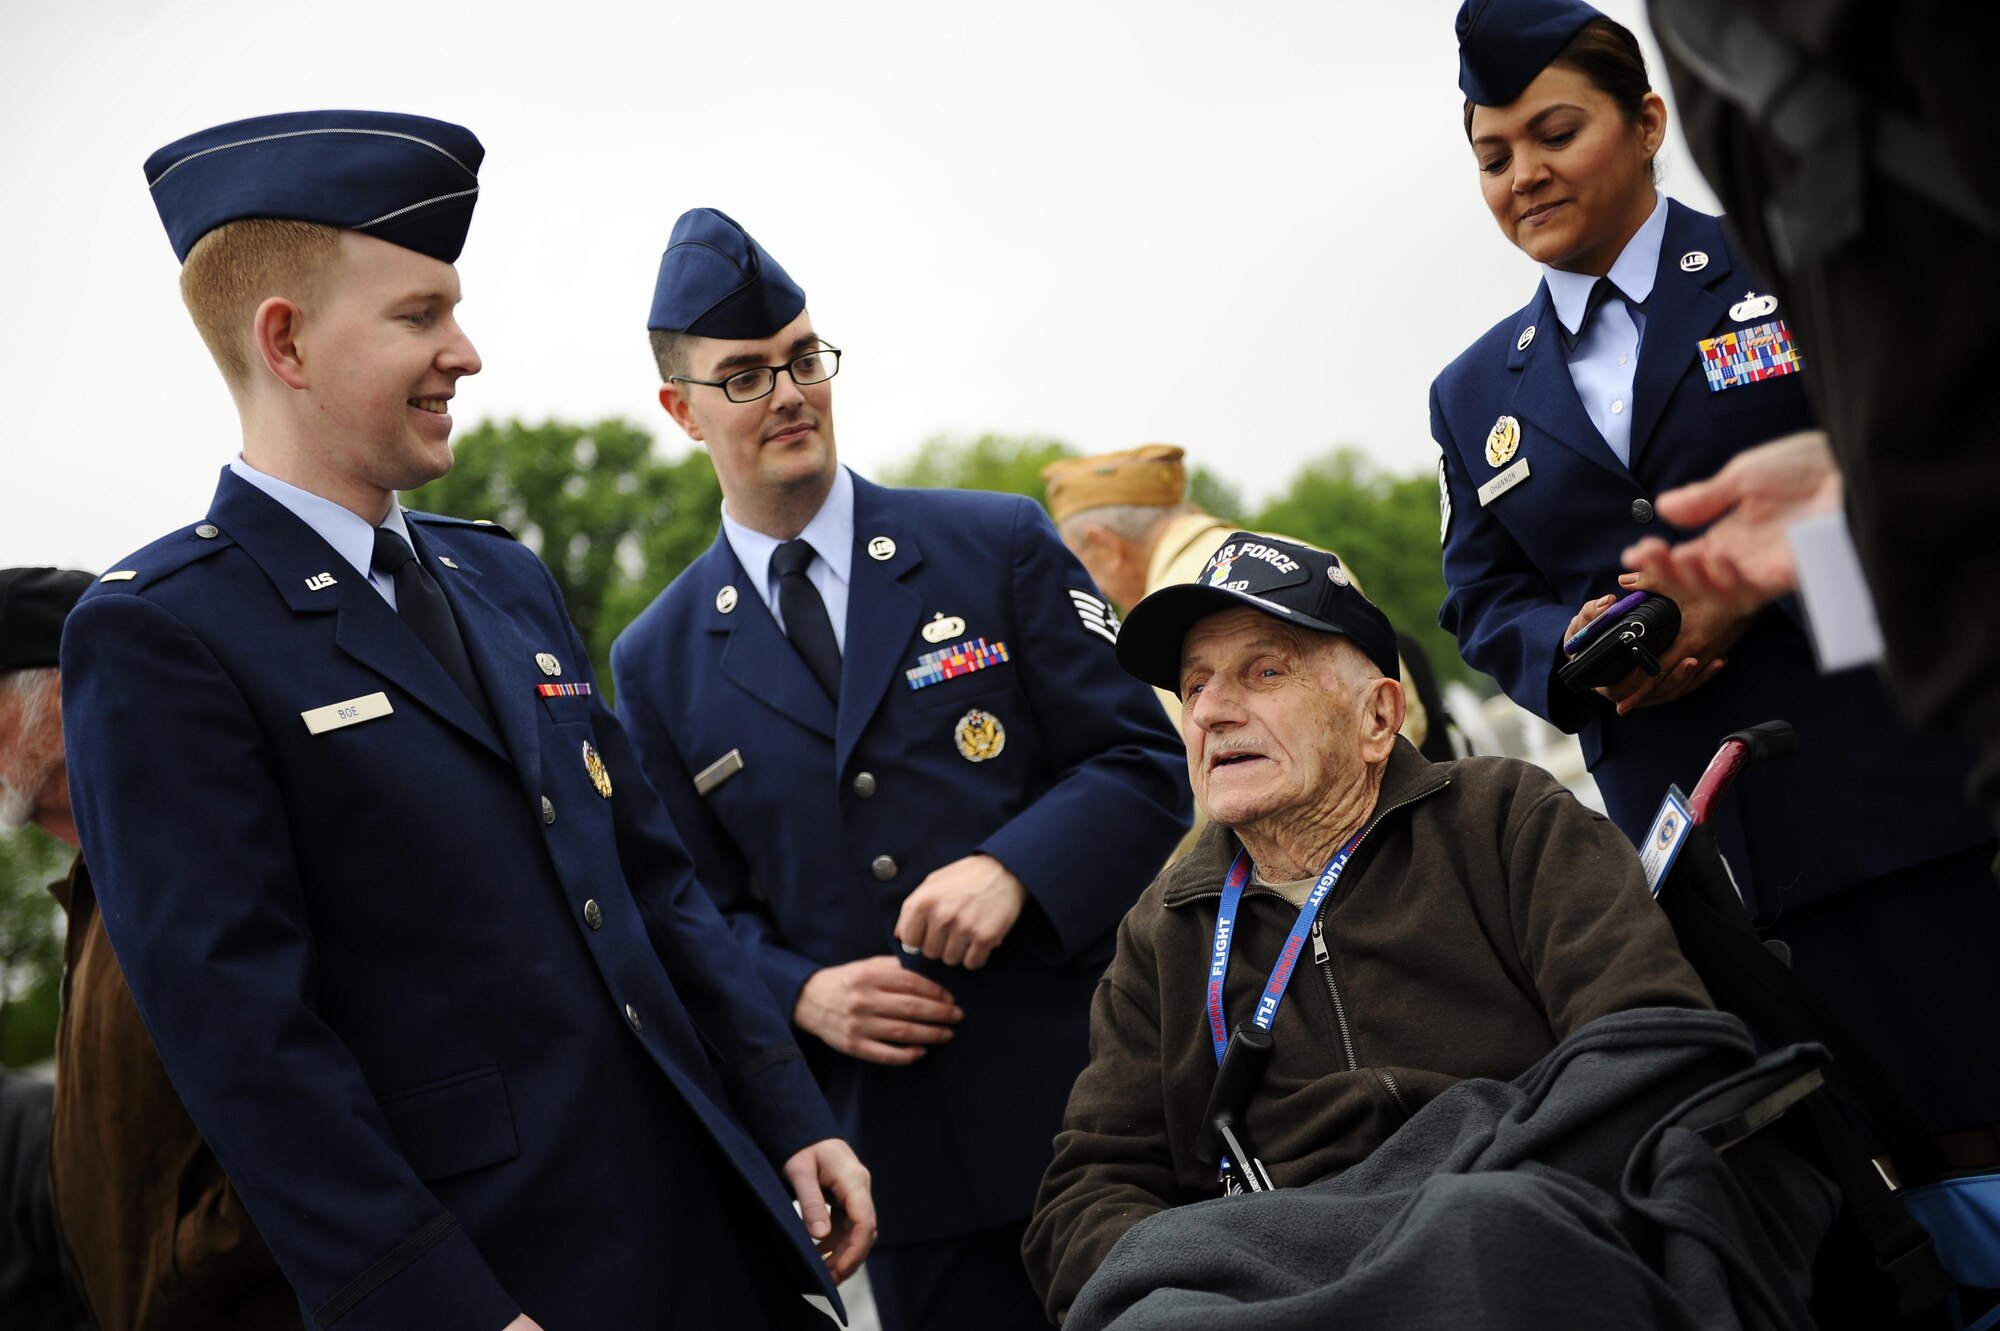 Airmen visit with a World War II veteran from the Georgia Honor Flight at the National World War II Memorial in Washington, D.C., April 30, 2016. The Georgia Honor Flight was one of many such flights to visit the nation’s capital. Upon their arrival, flight members were greeted by military personnel, Honor Flight volunteers and well-wishers (U.S. Air Force photo/Tech. Sgt. Bryan Franks)